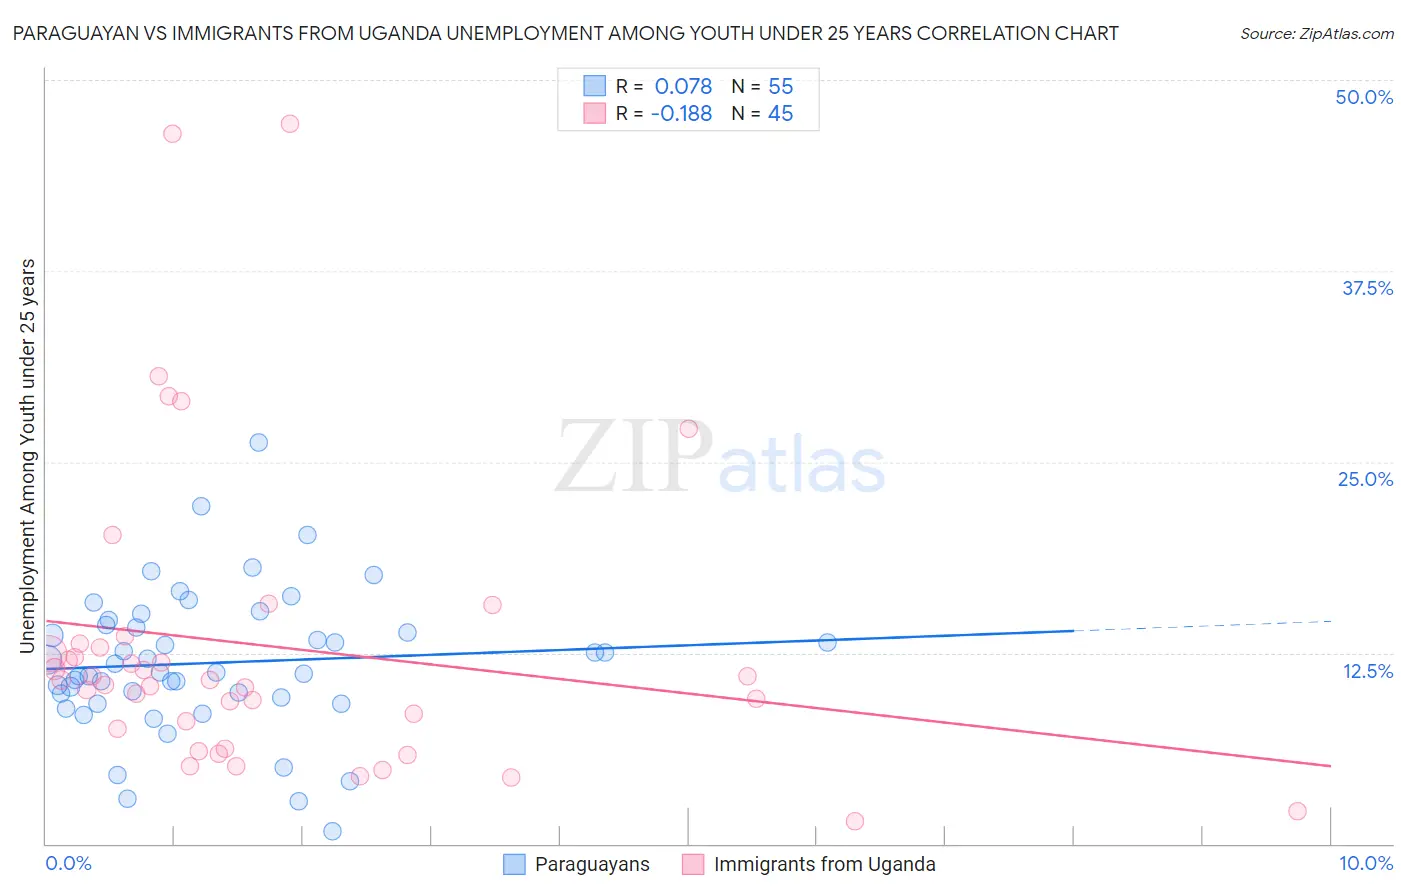 Paraguayan vs Immigrants from Uganda Unemployment Among Youth under 25 years